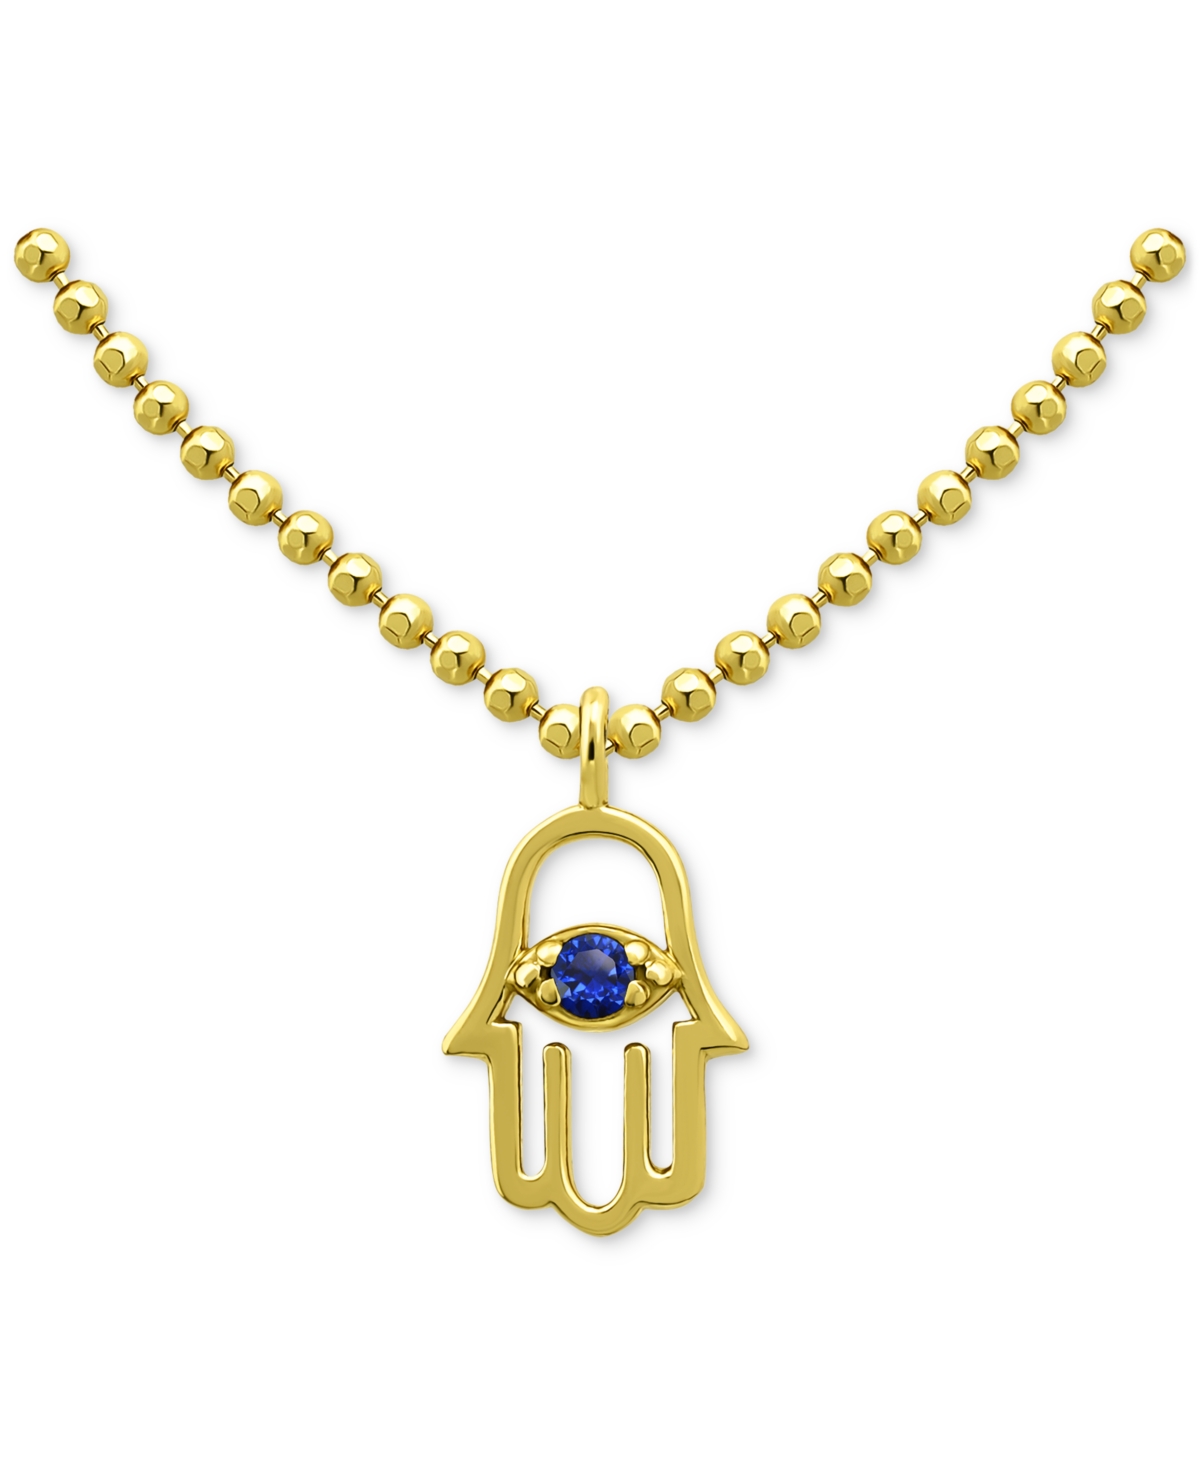 Giani Bernini Lab-grown Sapphire Hamsa Hand Pendant Necklace (3/8 Ct. T.w.) In 18k Gold-plated Sterling Silver, 16 In Blue Sapphire